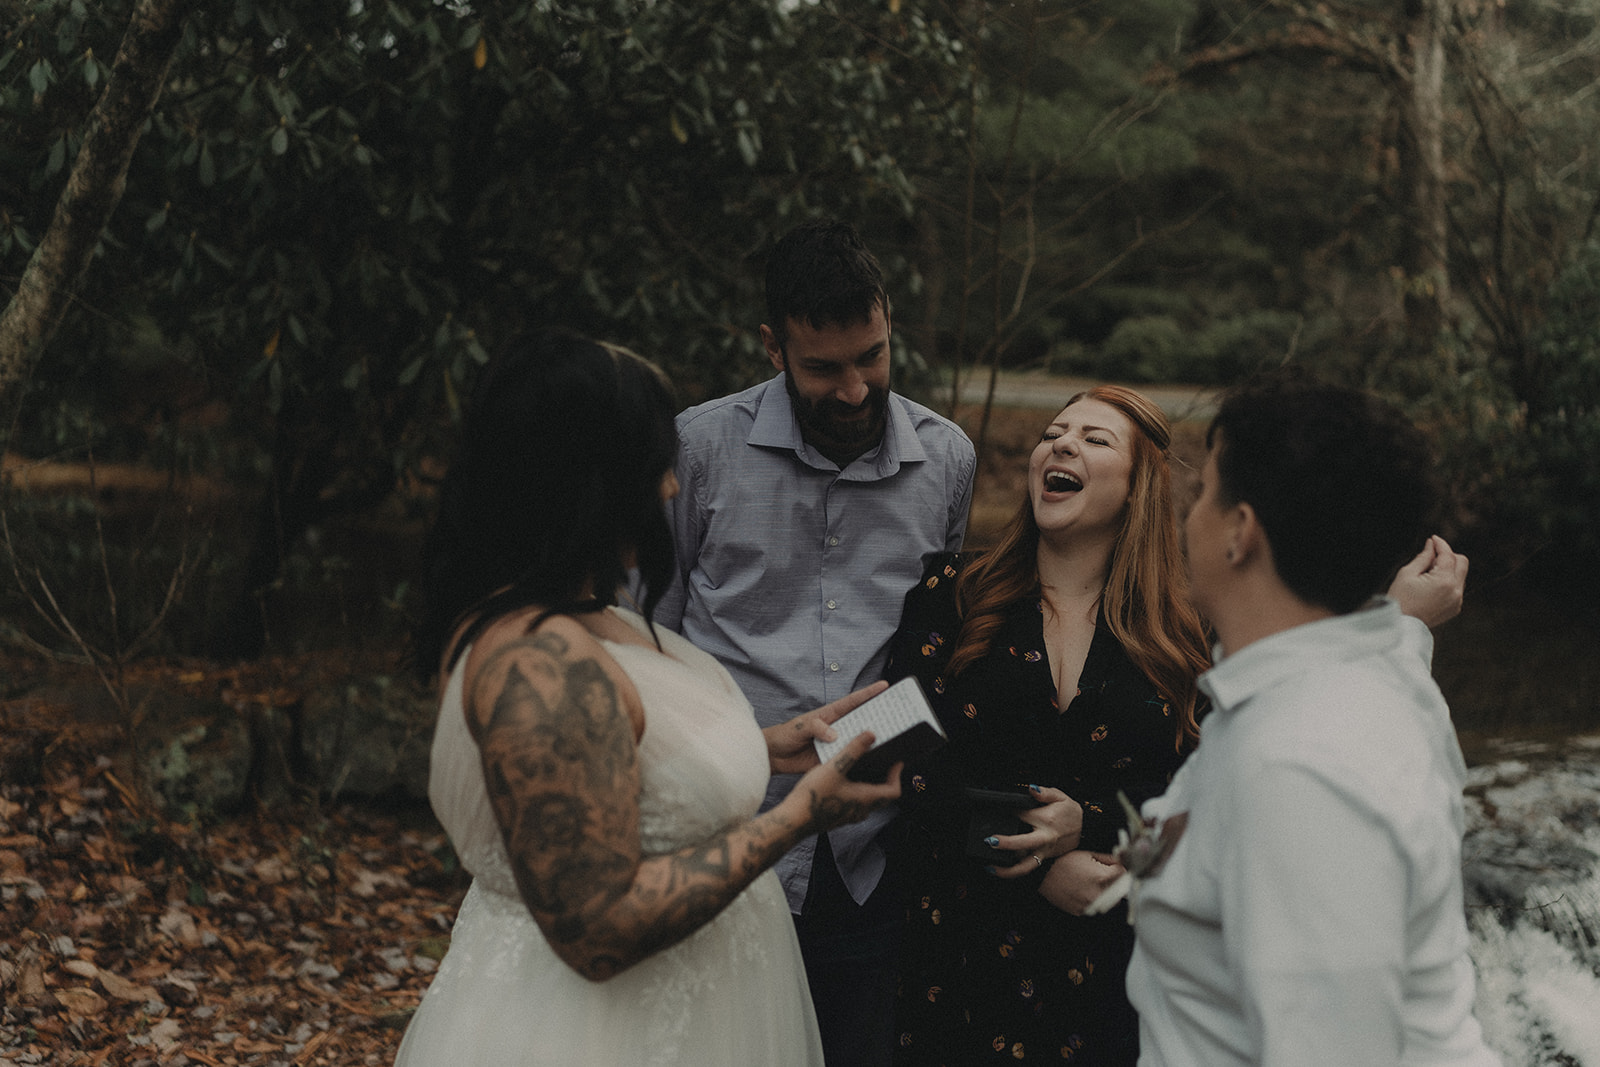 Vow Exchange Magic: Peyton and Memory's Dreamy Forest Wedding Moments